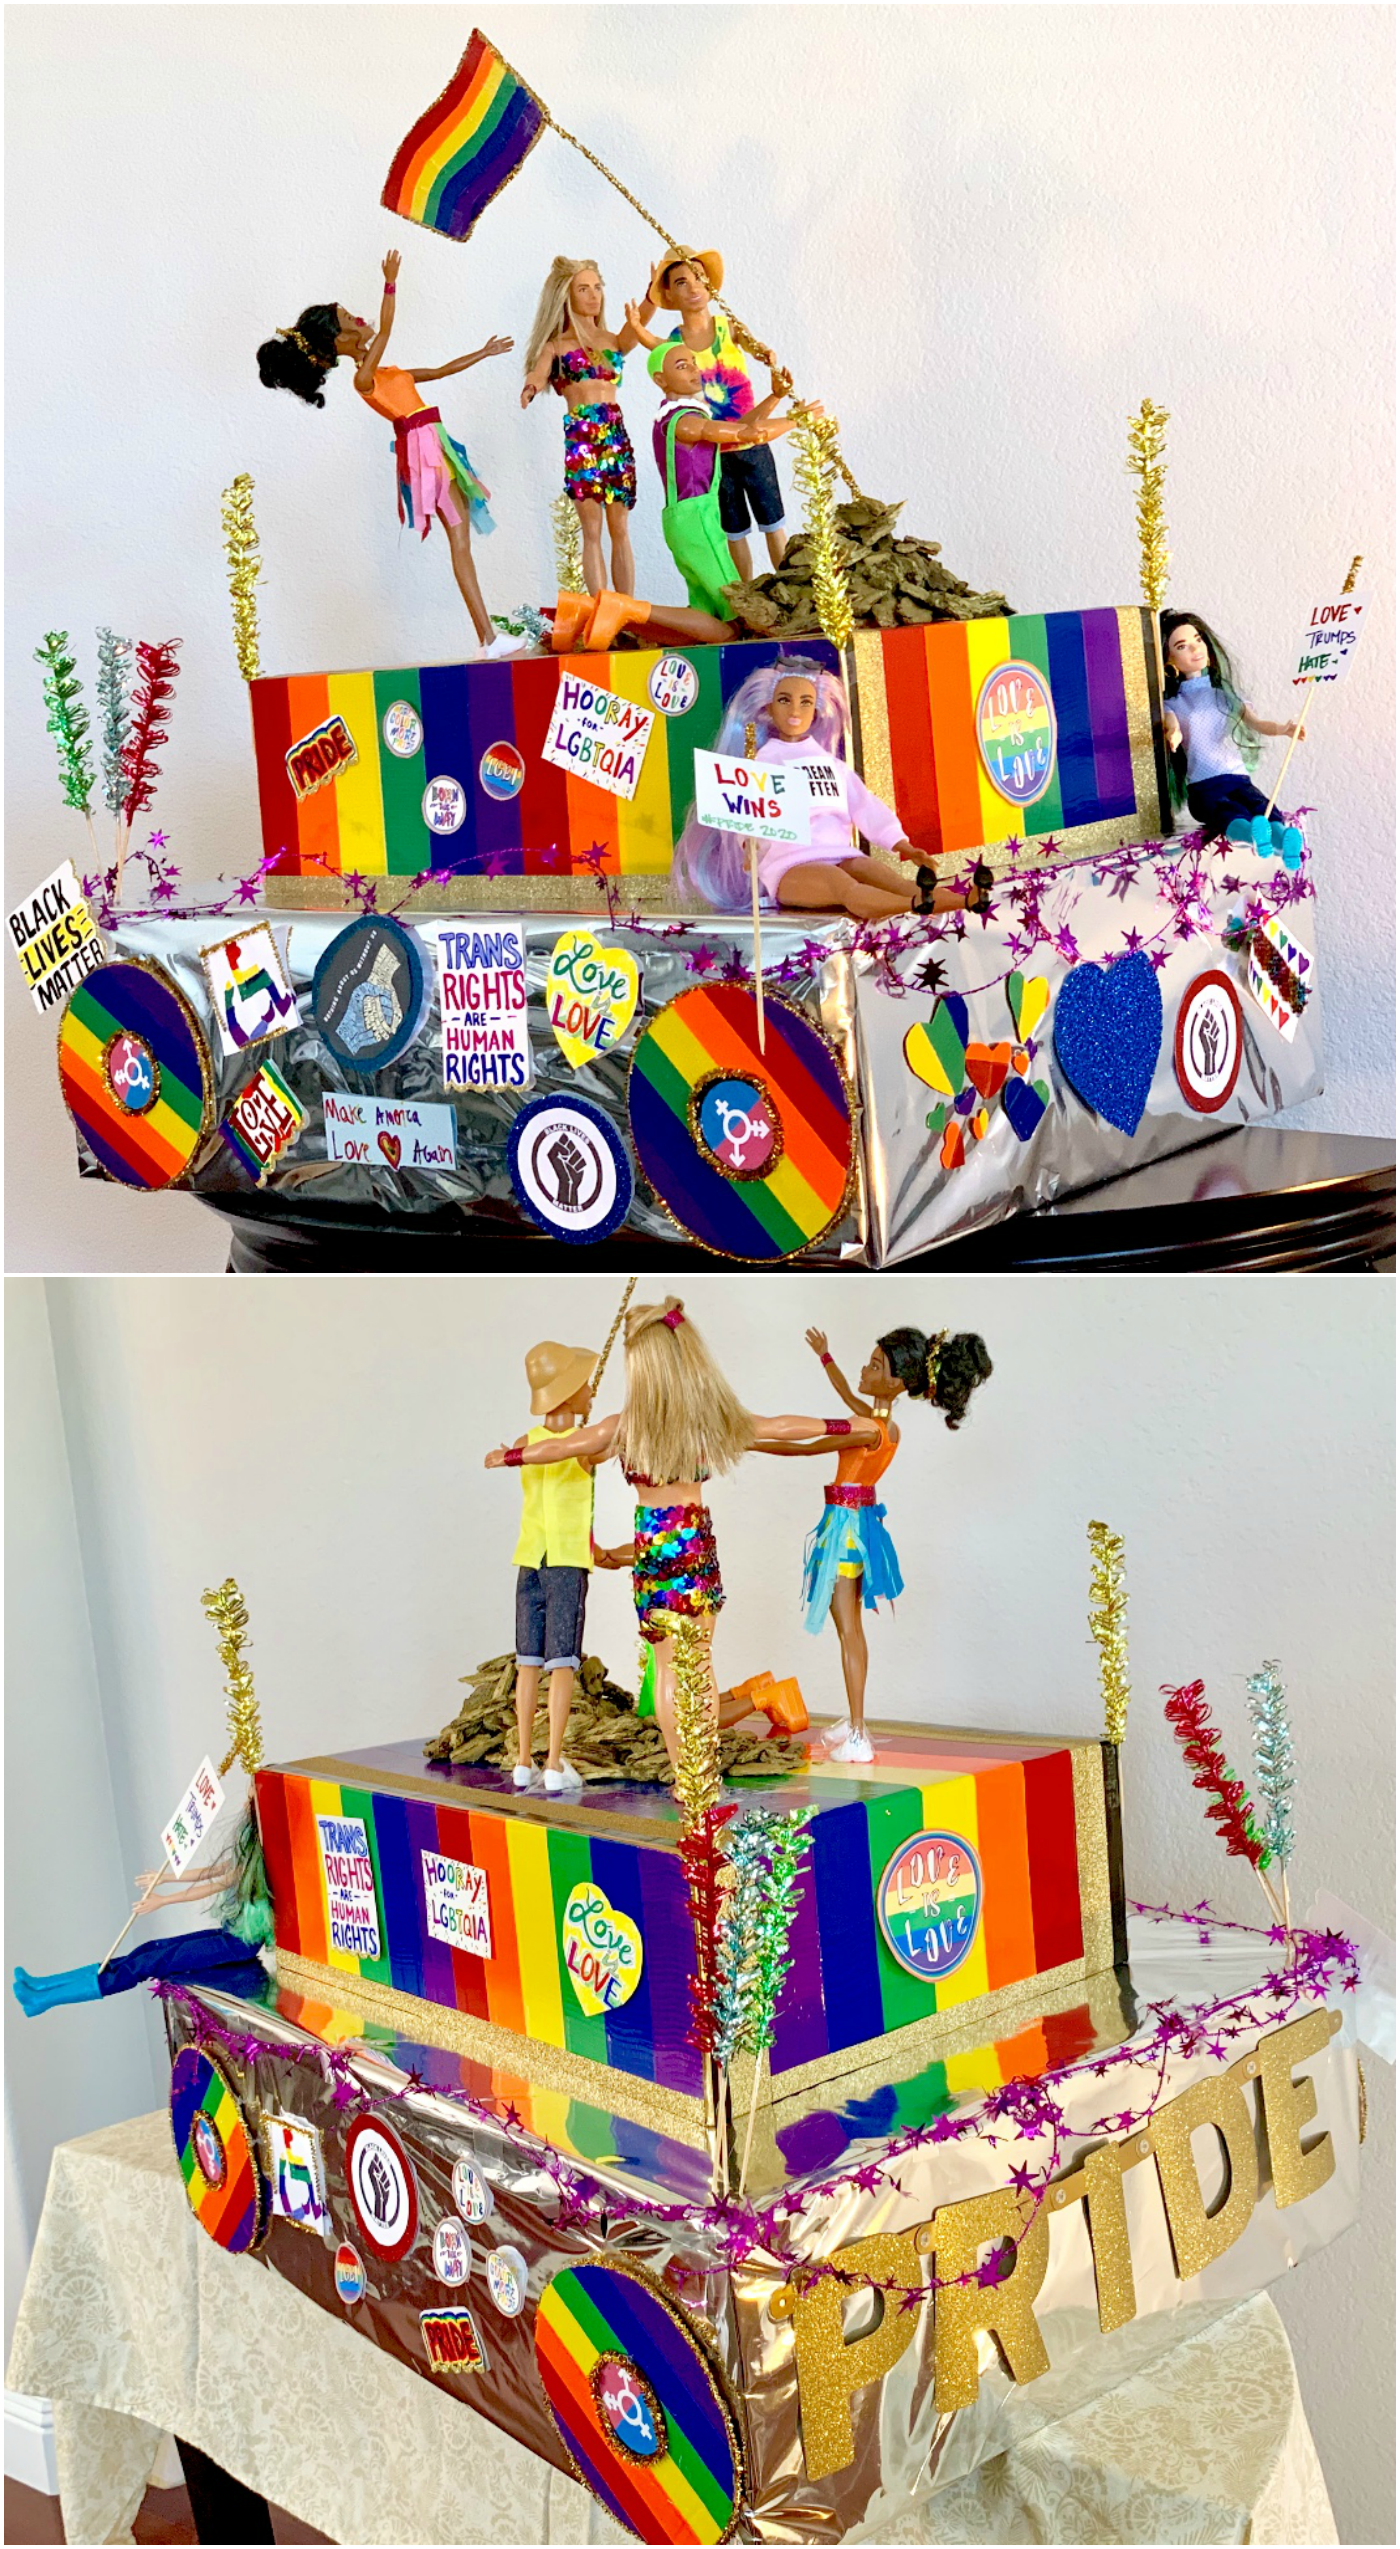 miniature diy pride float covered in rainbows, stickers, protest signs, with barbies on top